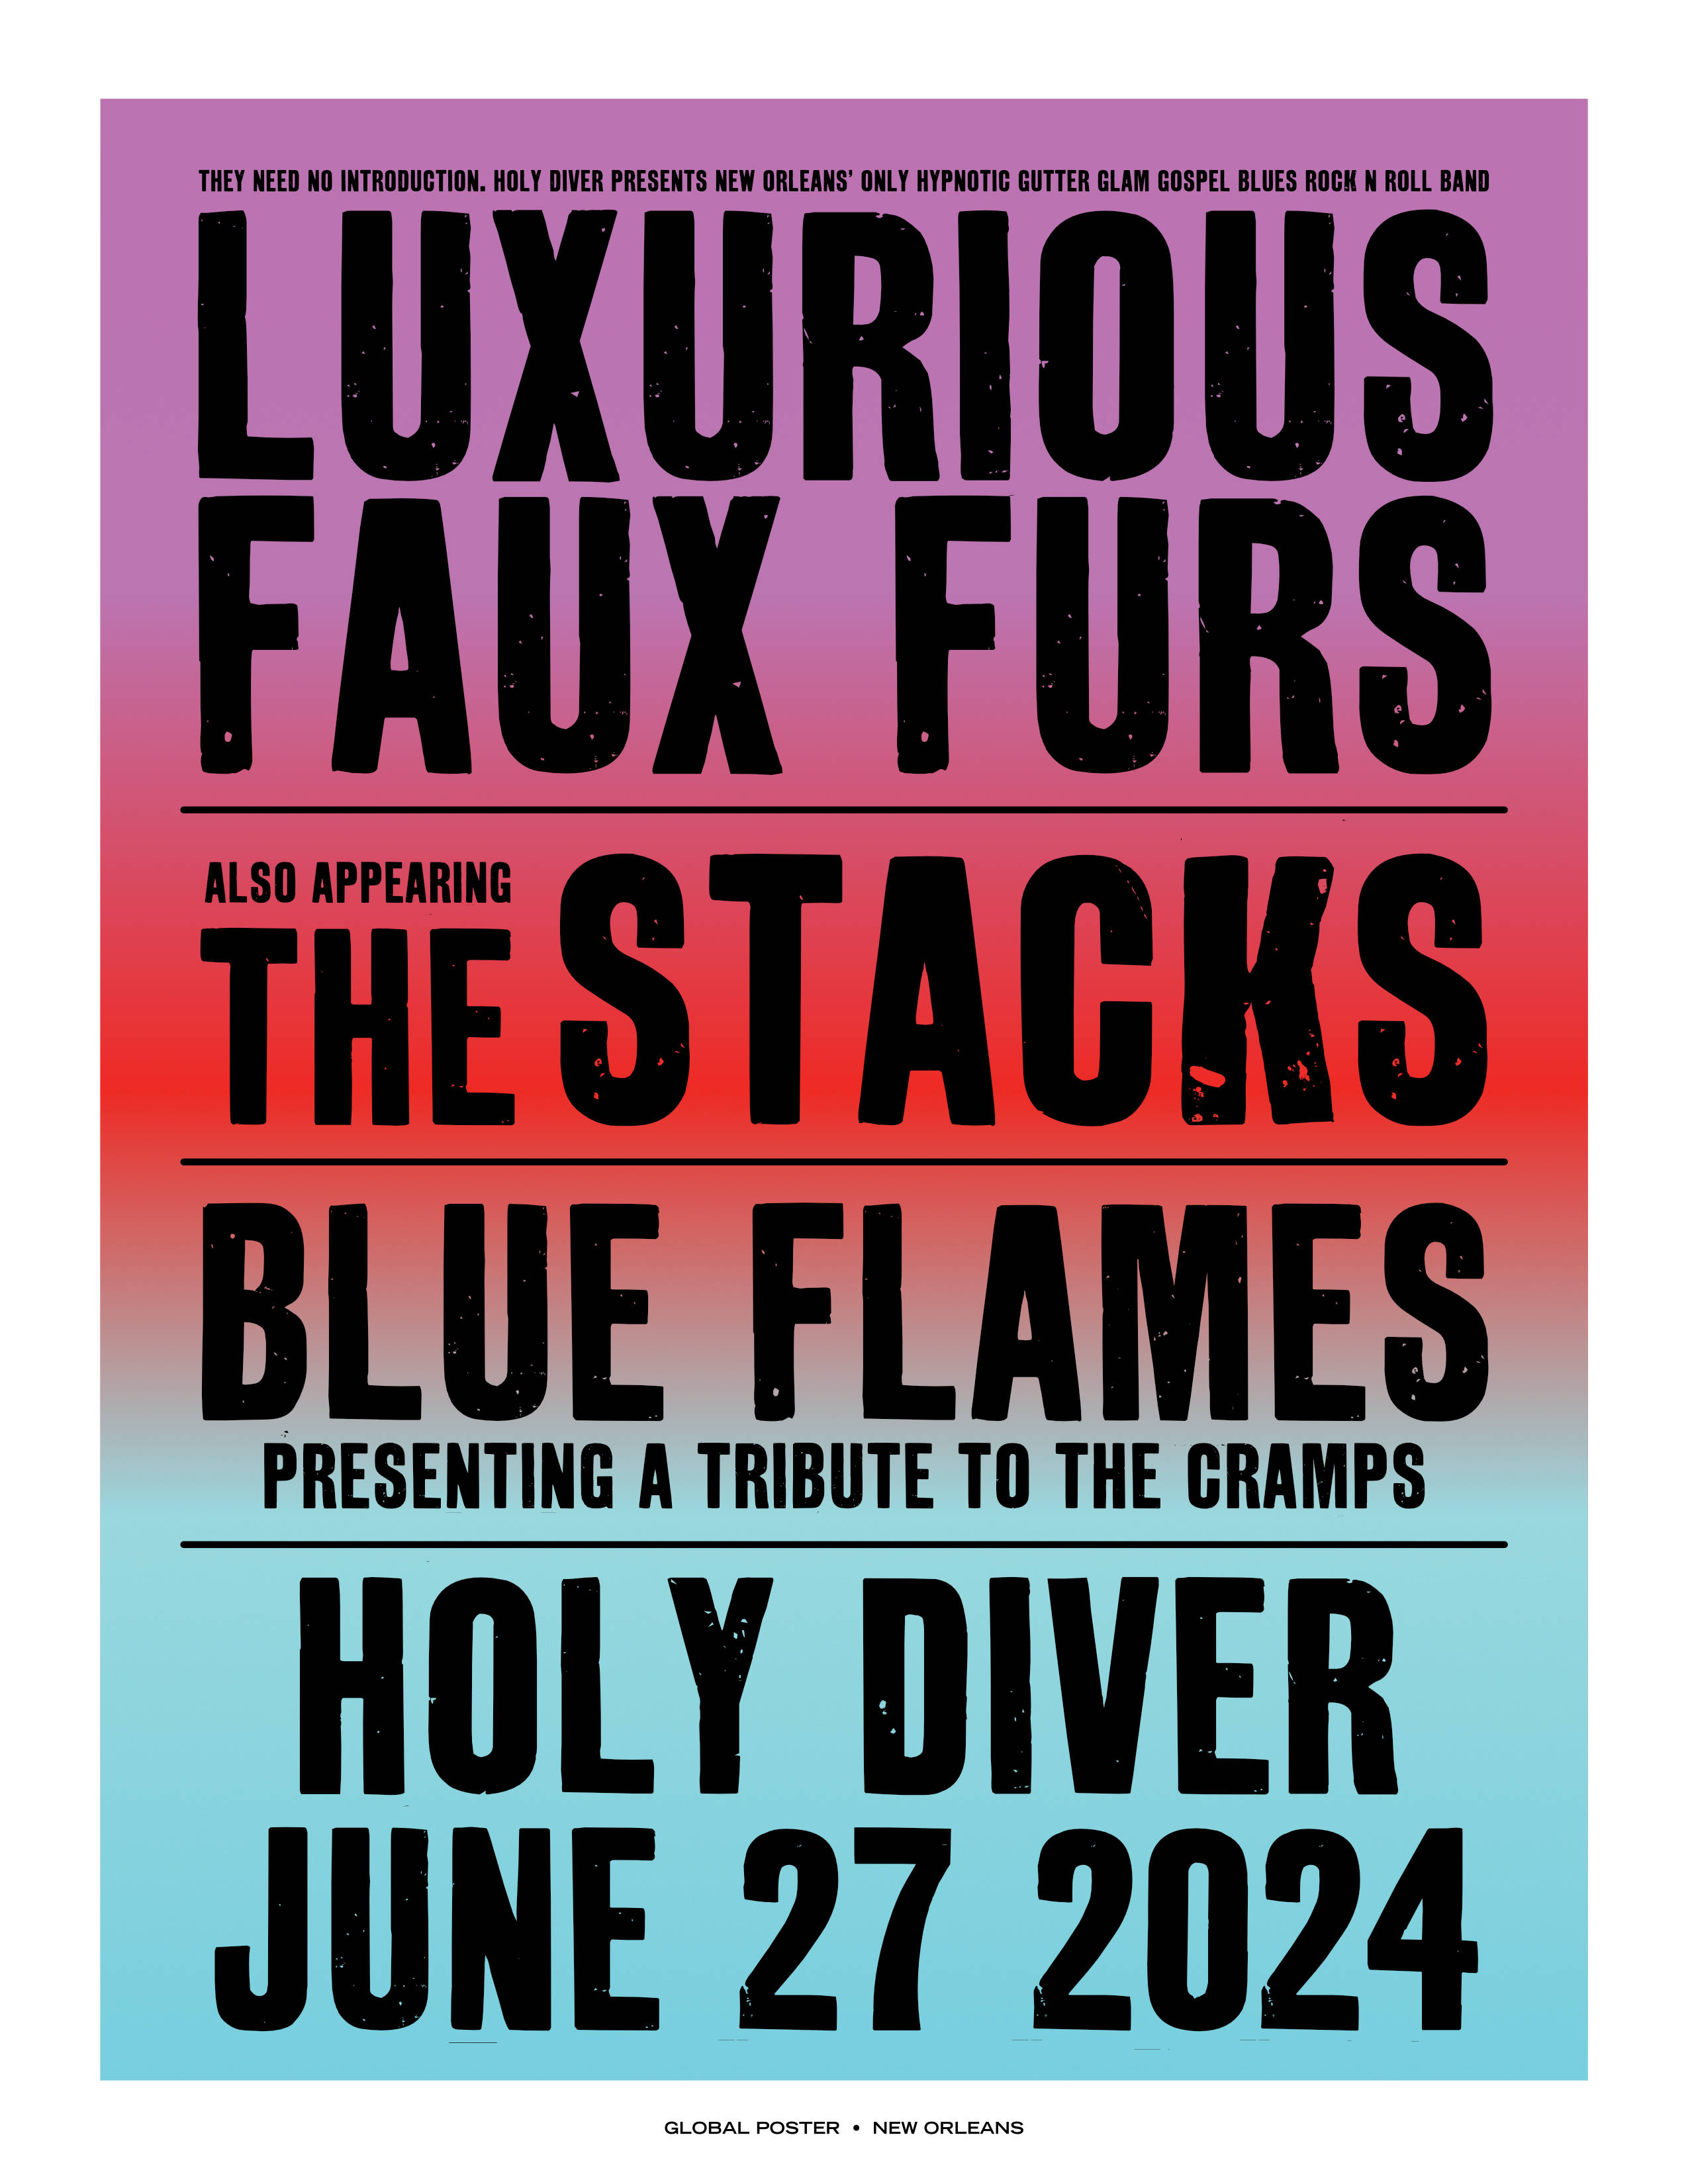 The Stacks New Orleans: Holy Diver, June 27 2024